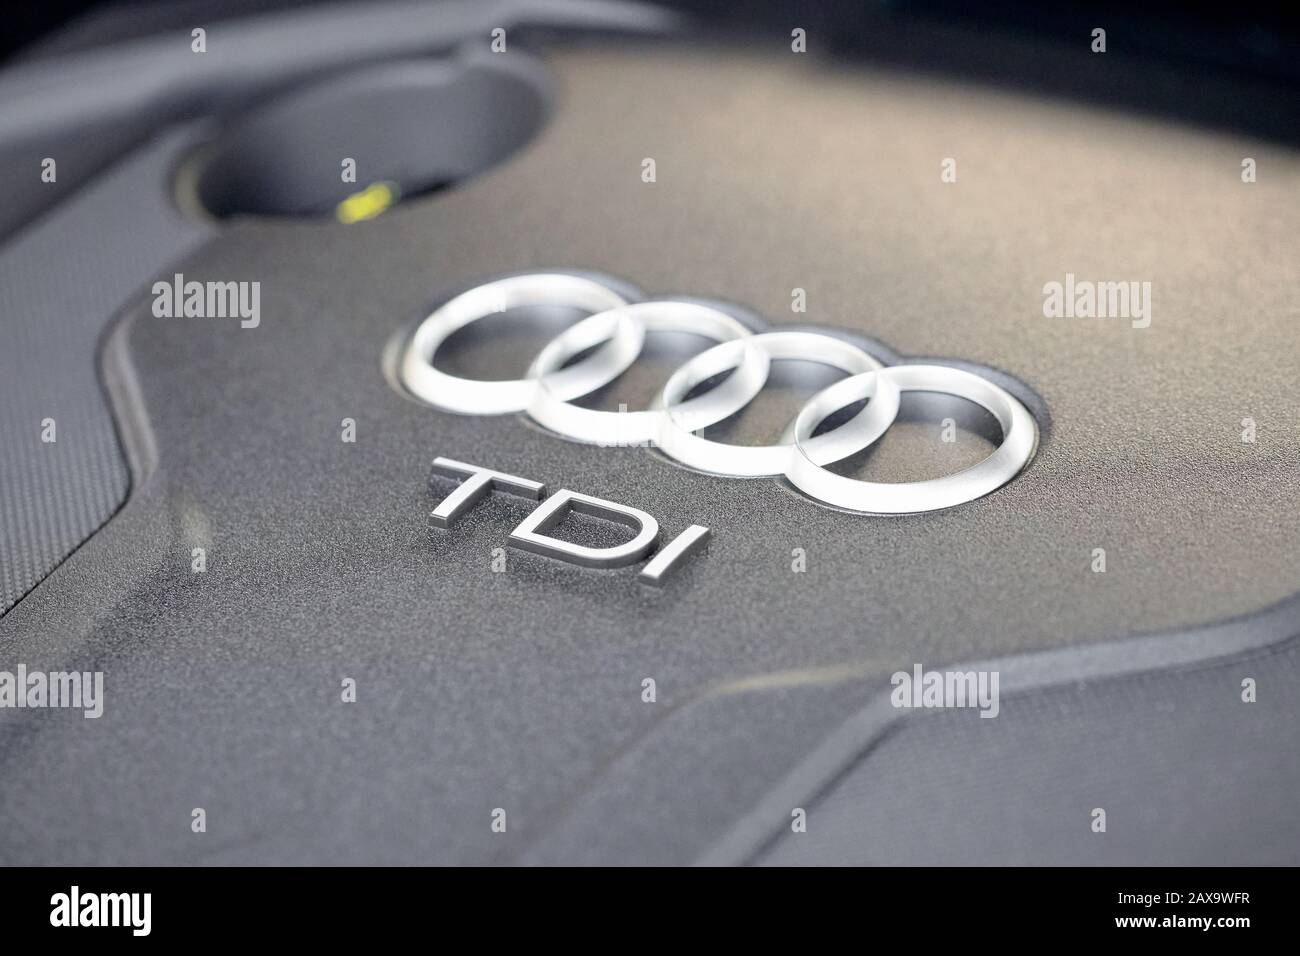 Tdi logo design hi-res stock photography and images - Alamy